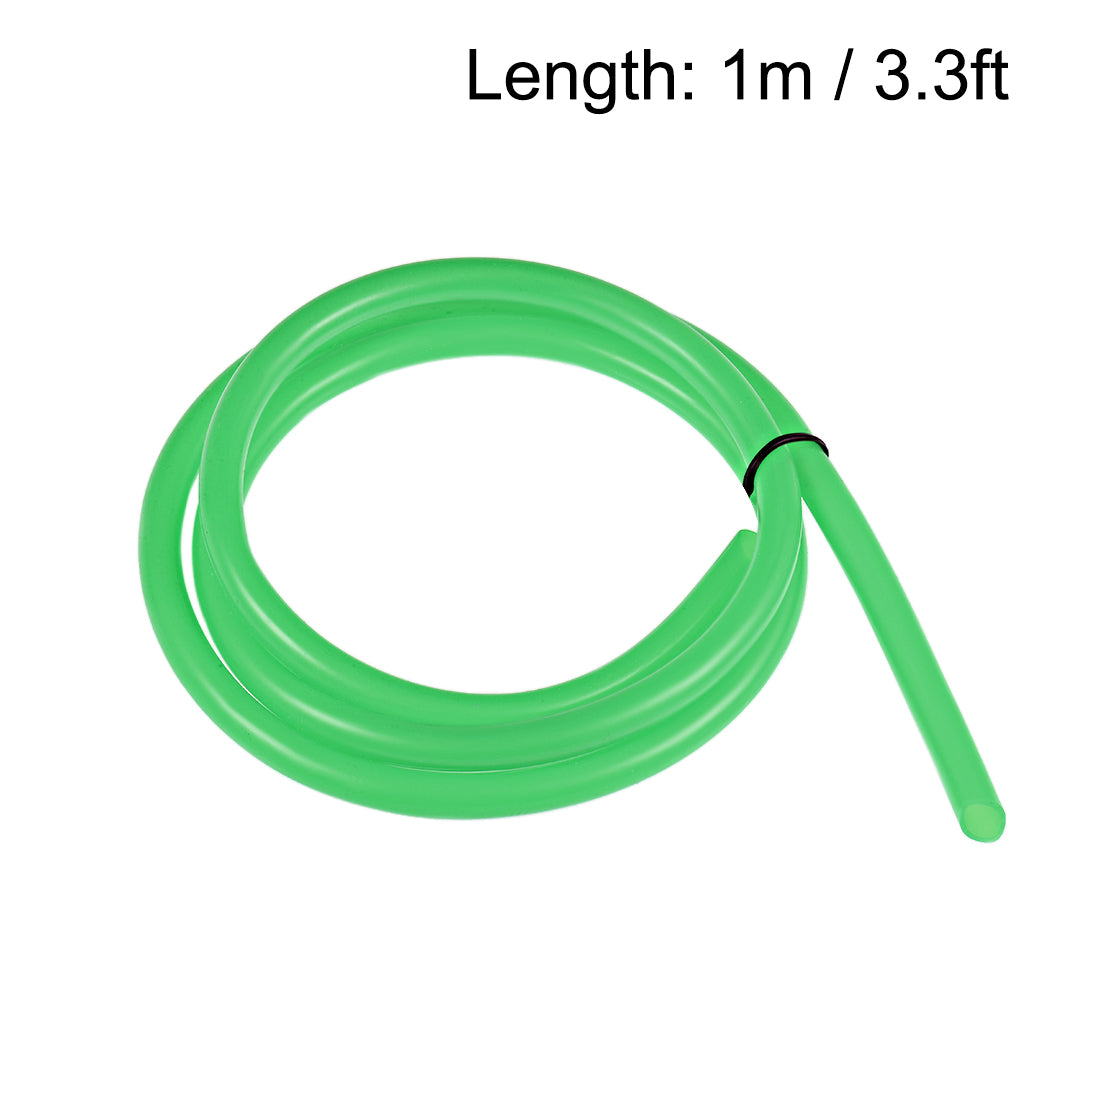 uxcell Uxcell Silicone Tube, 1/4 inch ID x 5/16 inch OD 1m/3.3ft Tubing Green